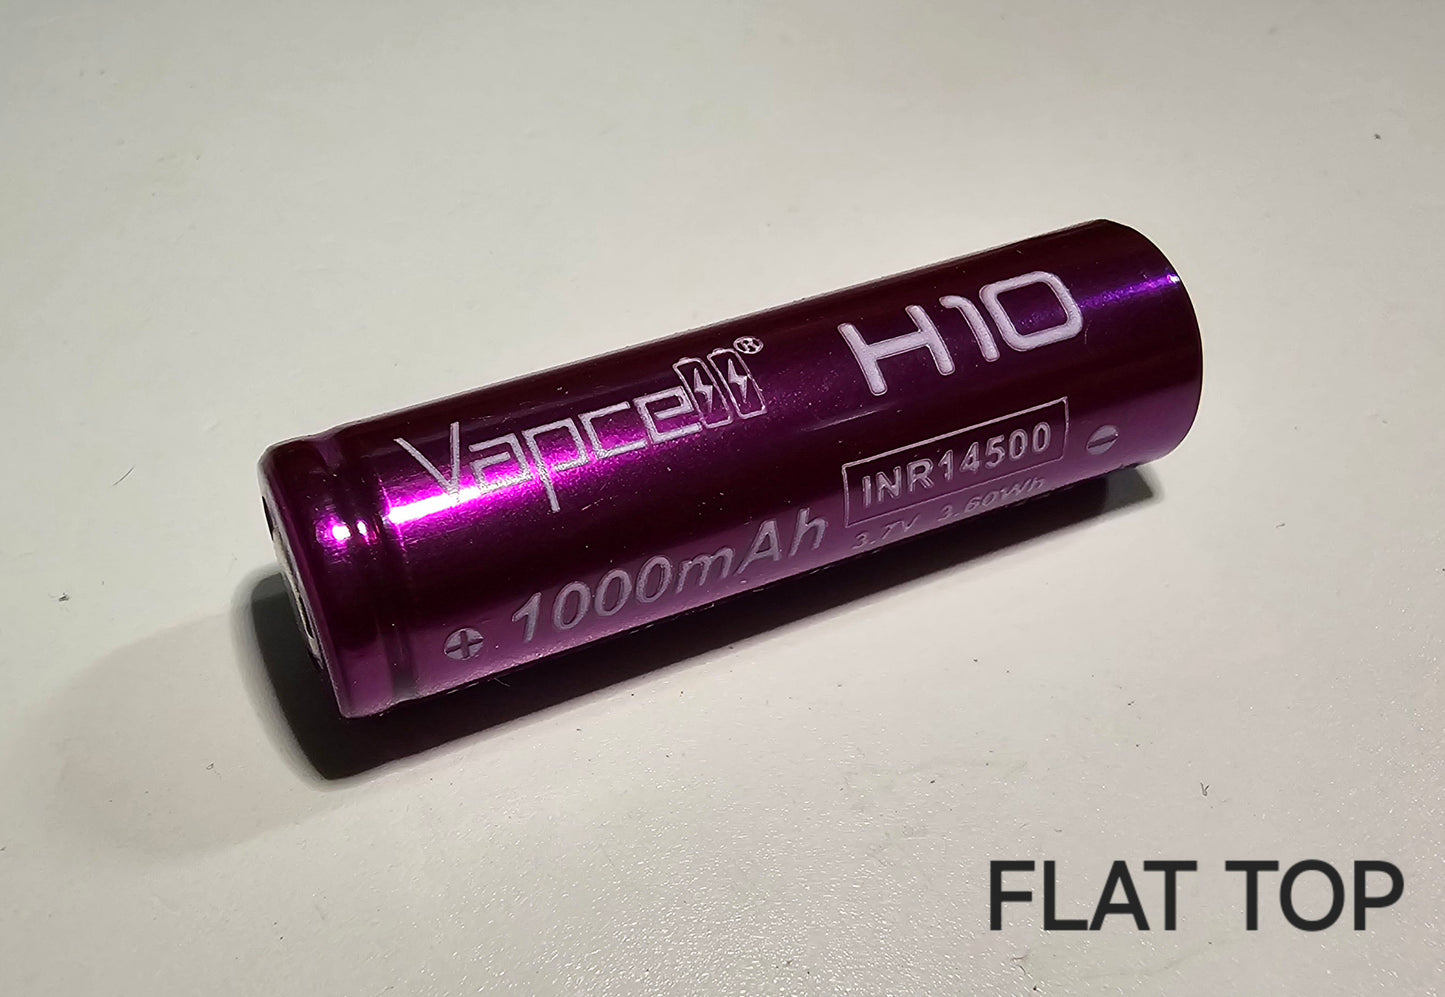 VAPCELL H10 14500 10A LITHIUM-ION RECHARGEABLE BATTERY FLAT TOP *** ONLY PURCHASE WITH FLASHLIGHT + FEDEX SHIPPING ***